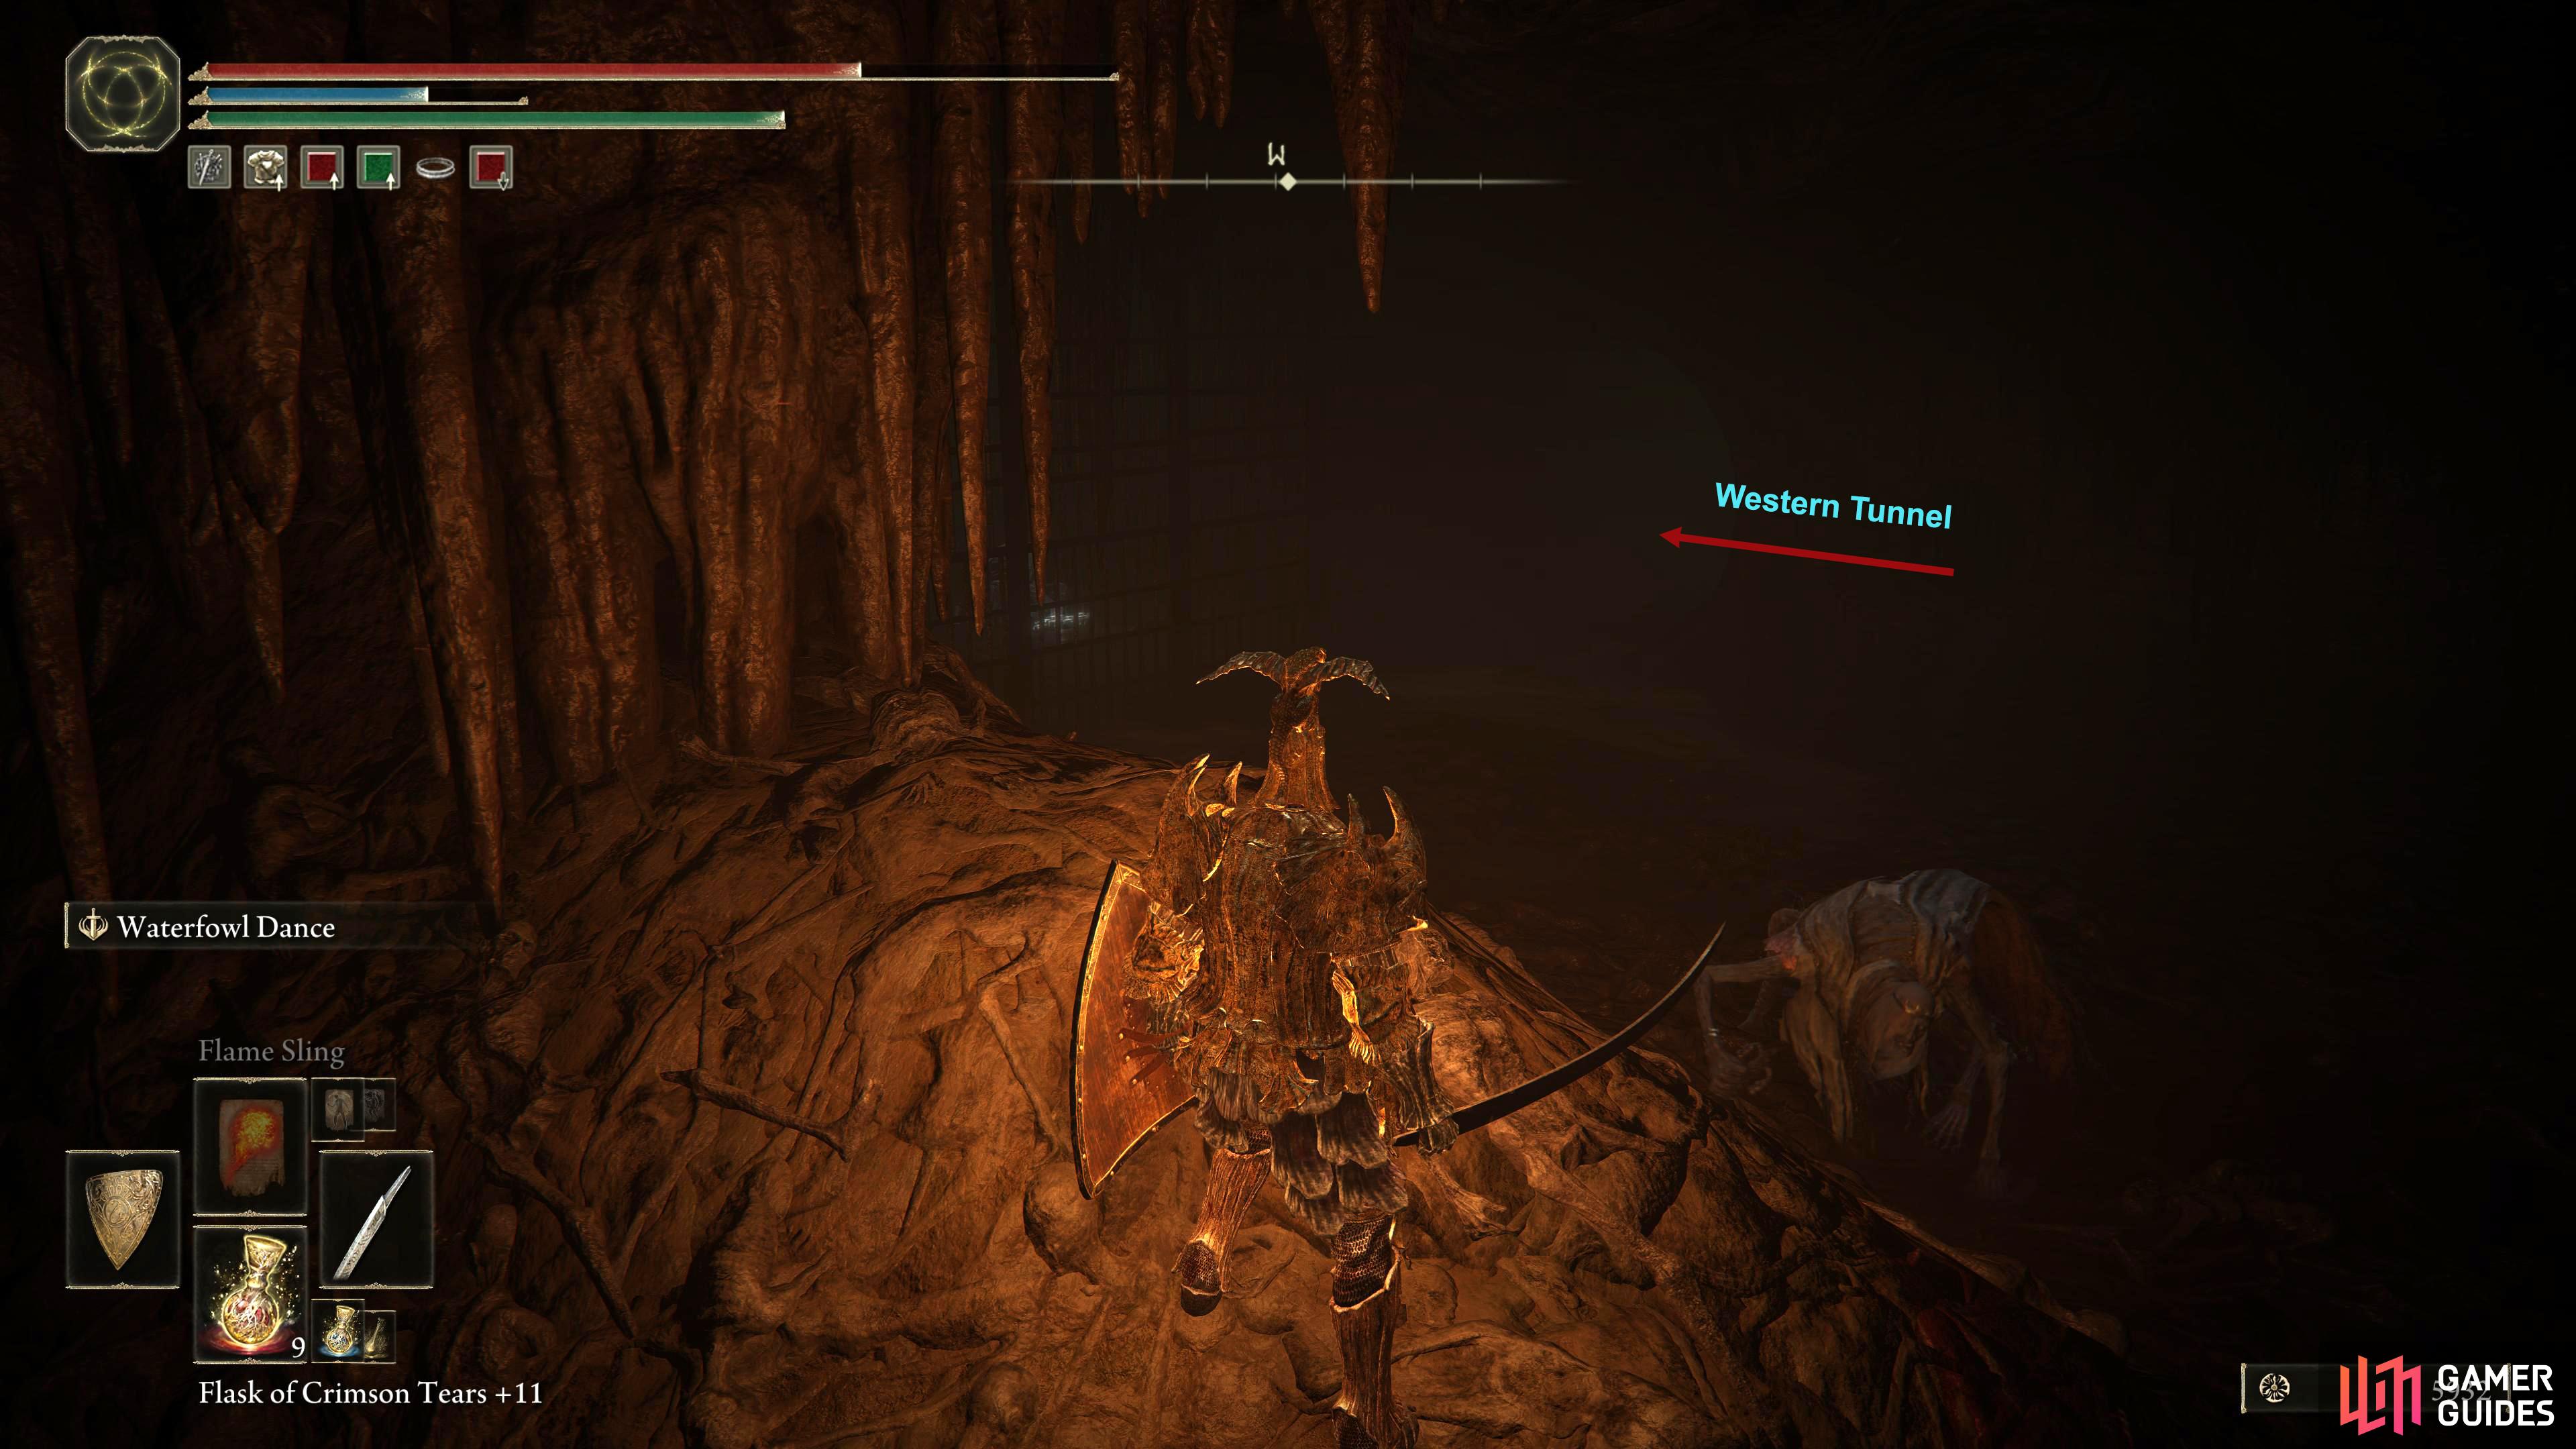 If you don't want to die for some meager trinkets, take the western tunnel to your left as soon as you drop.